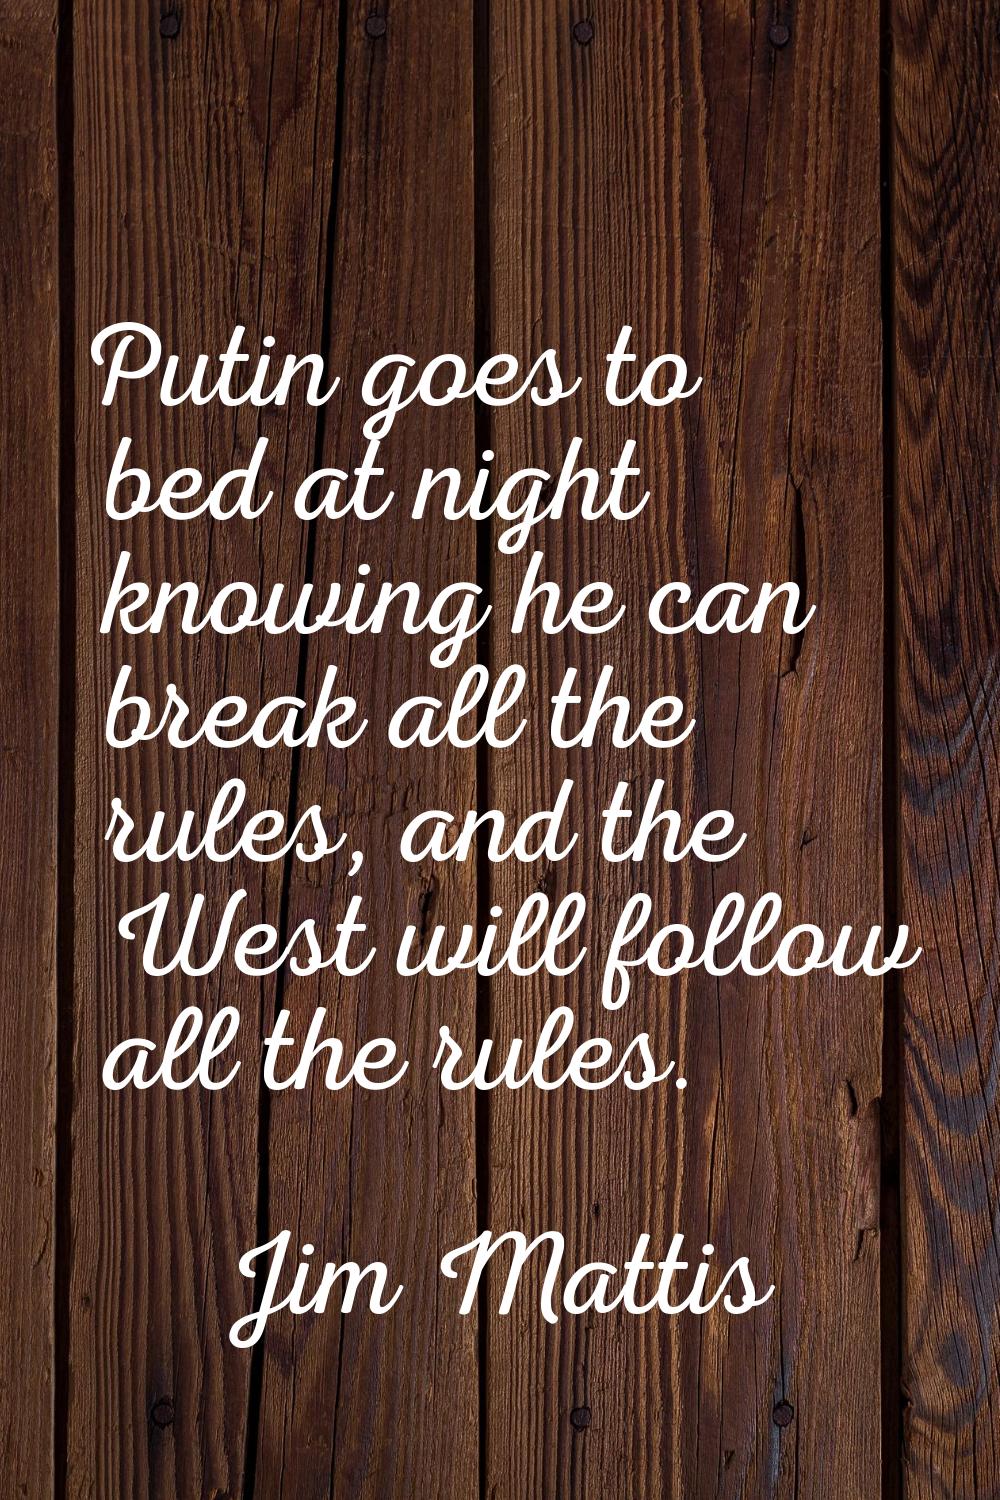 Putin goes to bed at night knowing he can break all the rules, and the West will follow all the rul